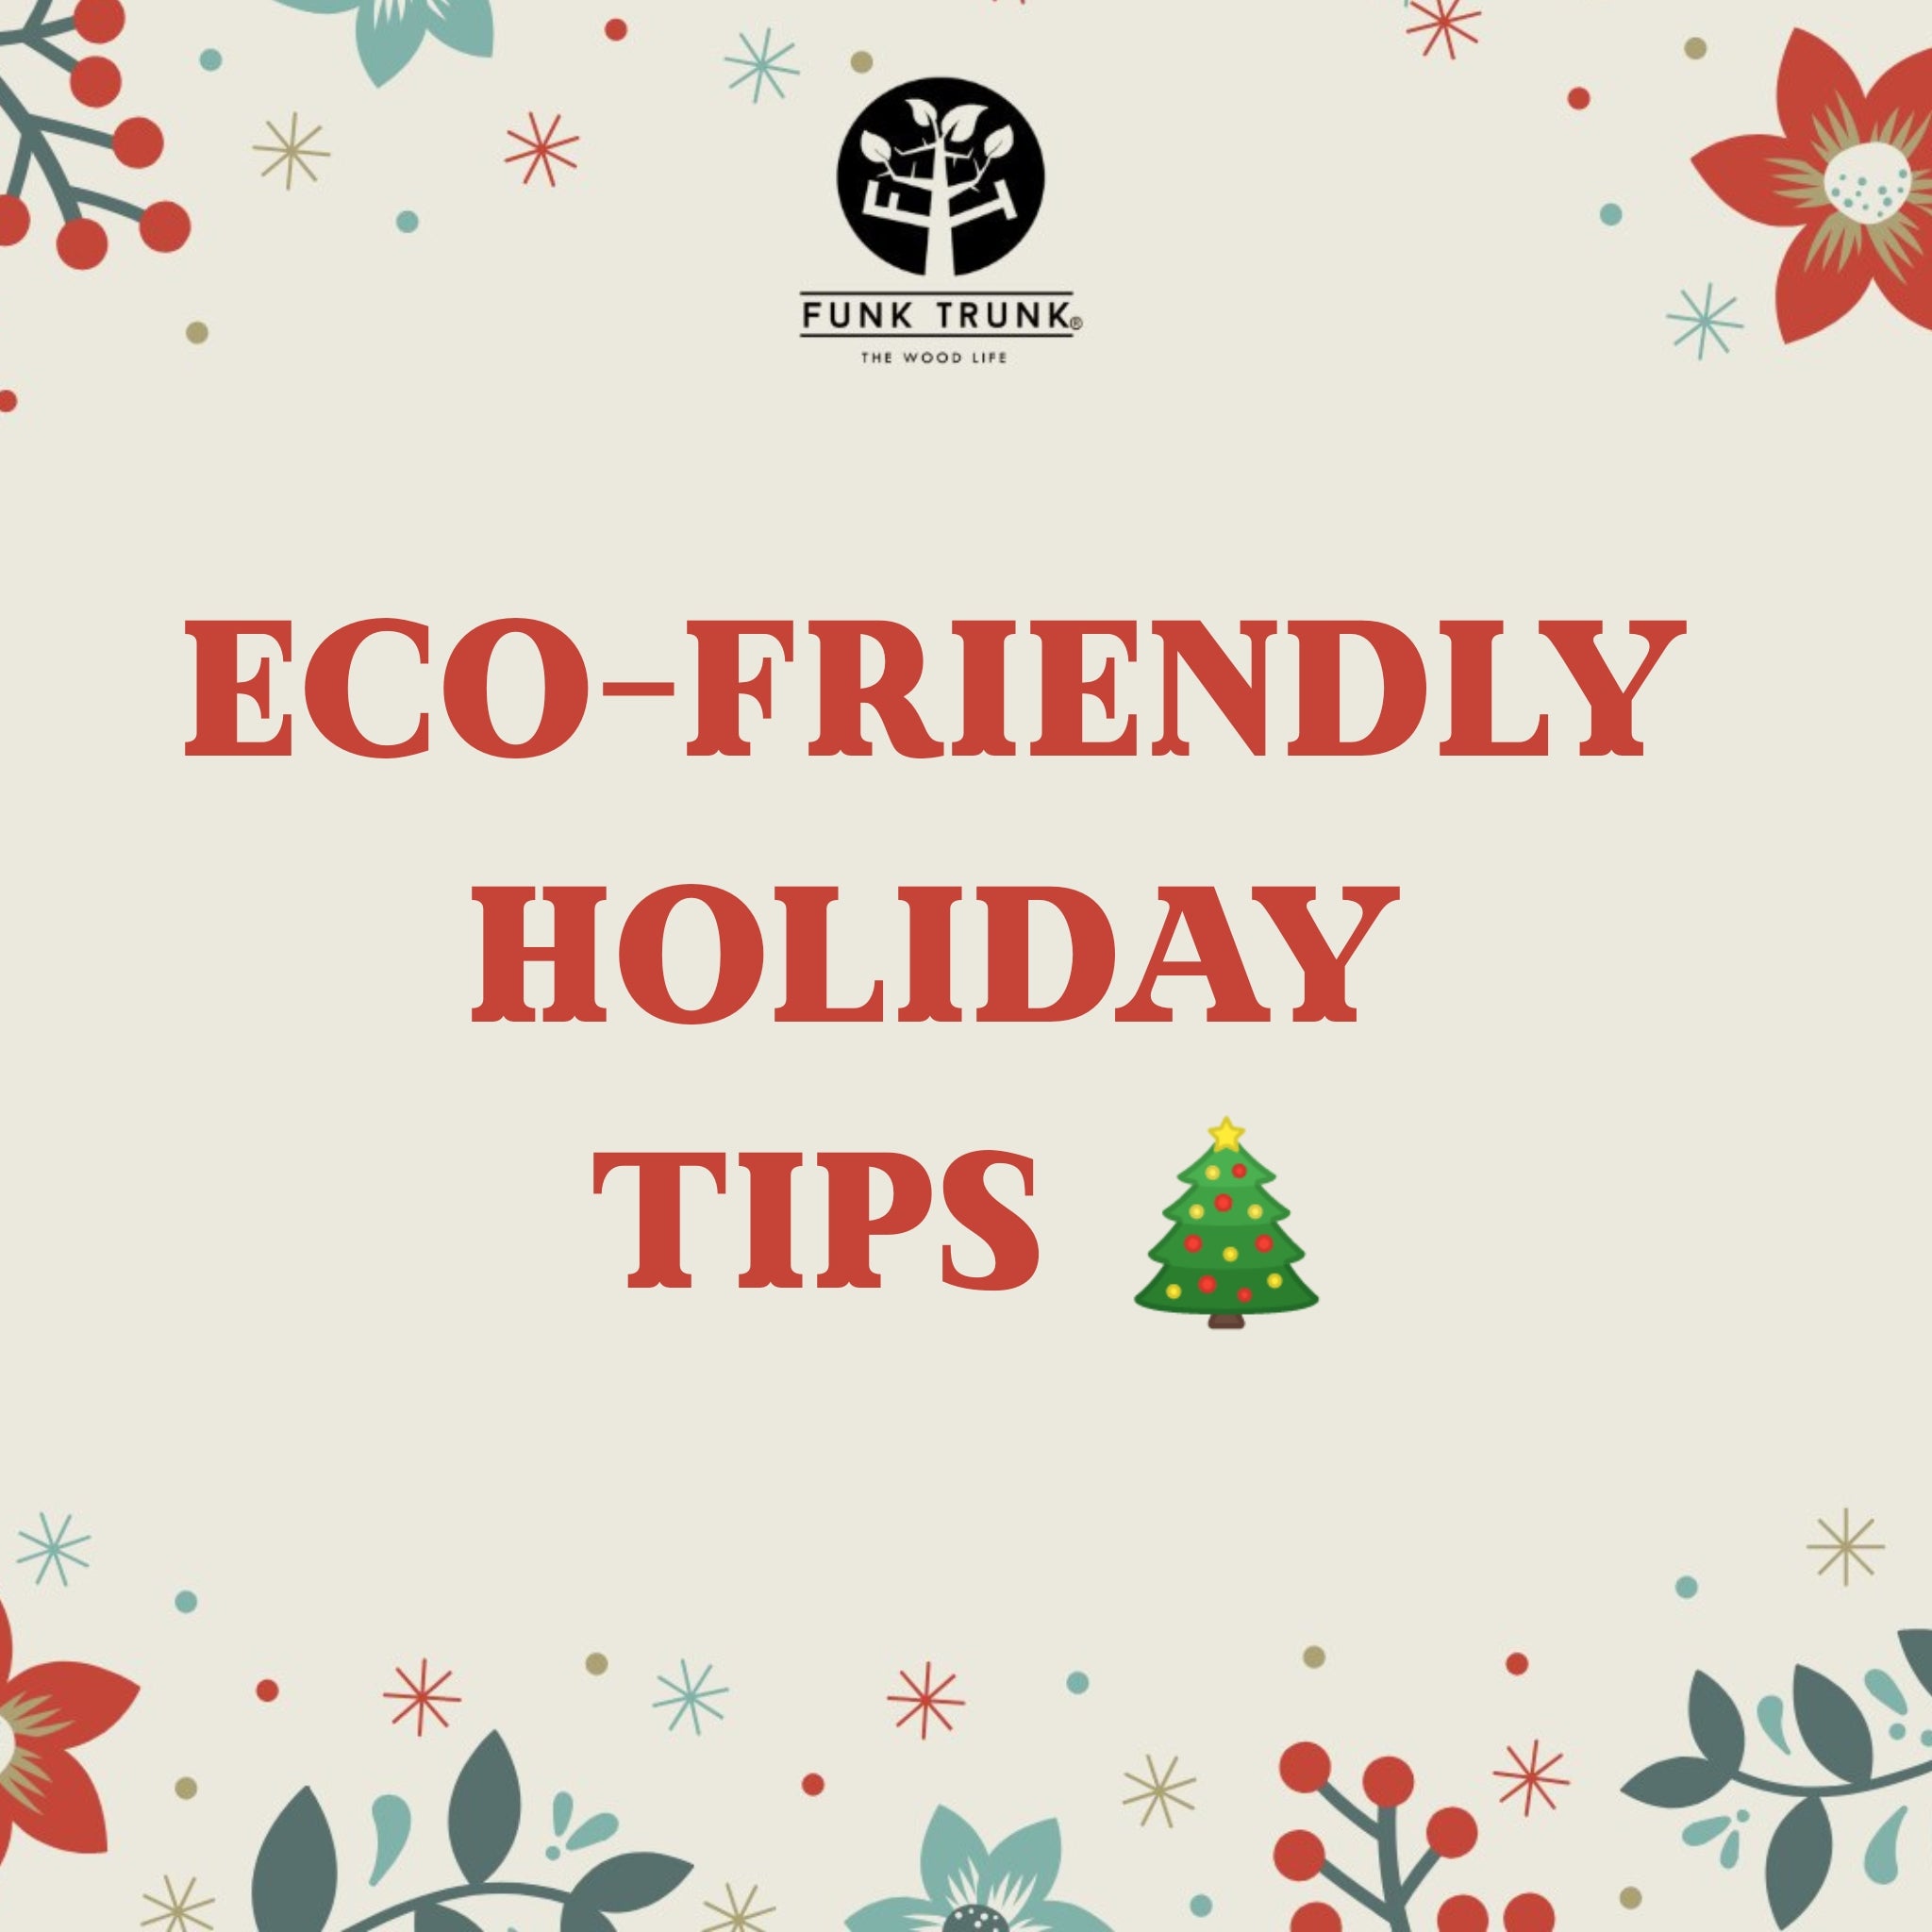 5 Ways To Be Eco-Friendly This Holiday